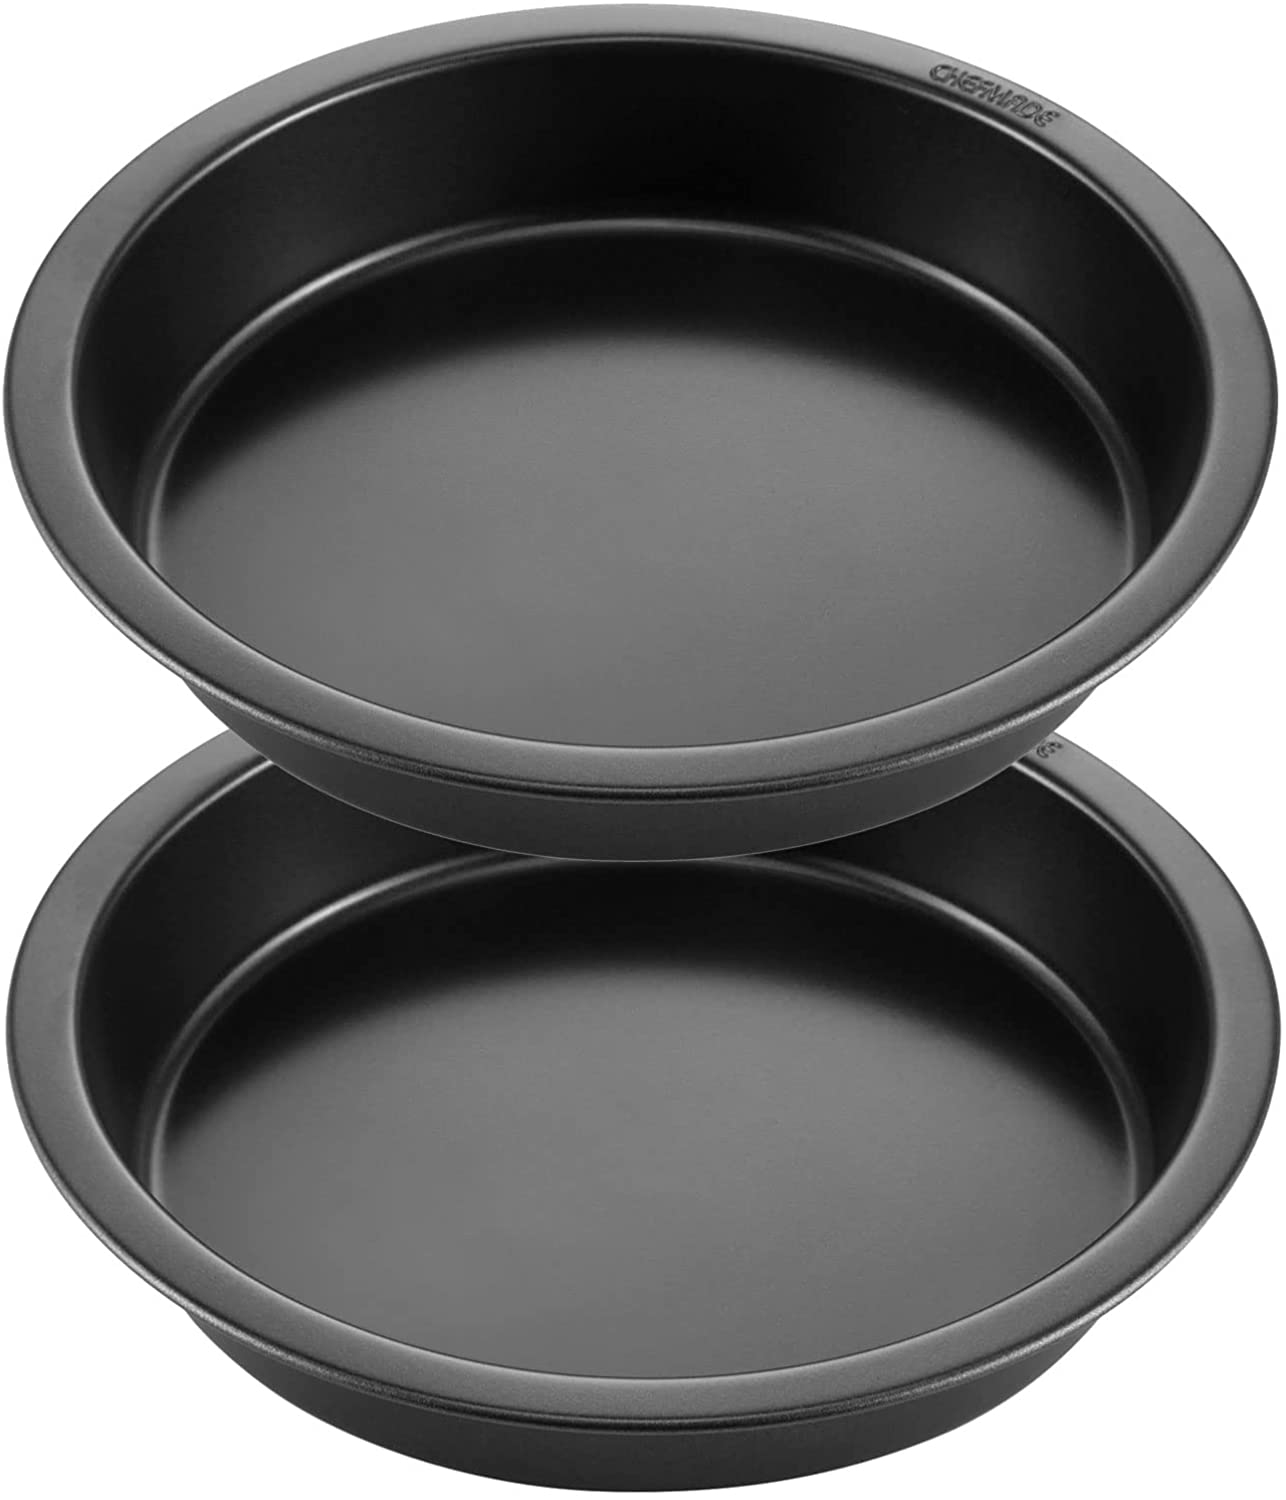 Cannele Mold 12 Well (black) - CHEFMADE official store